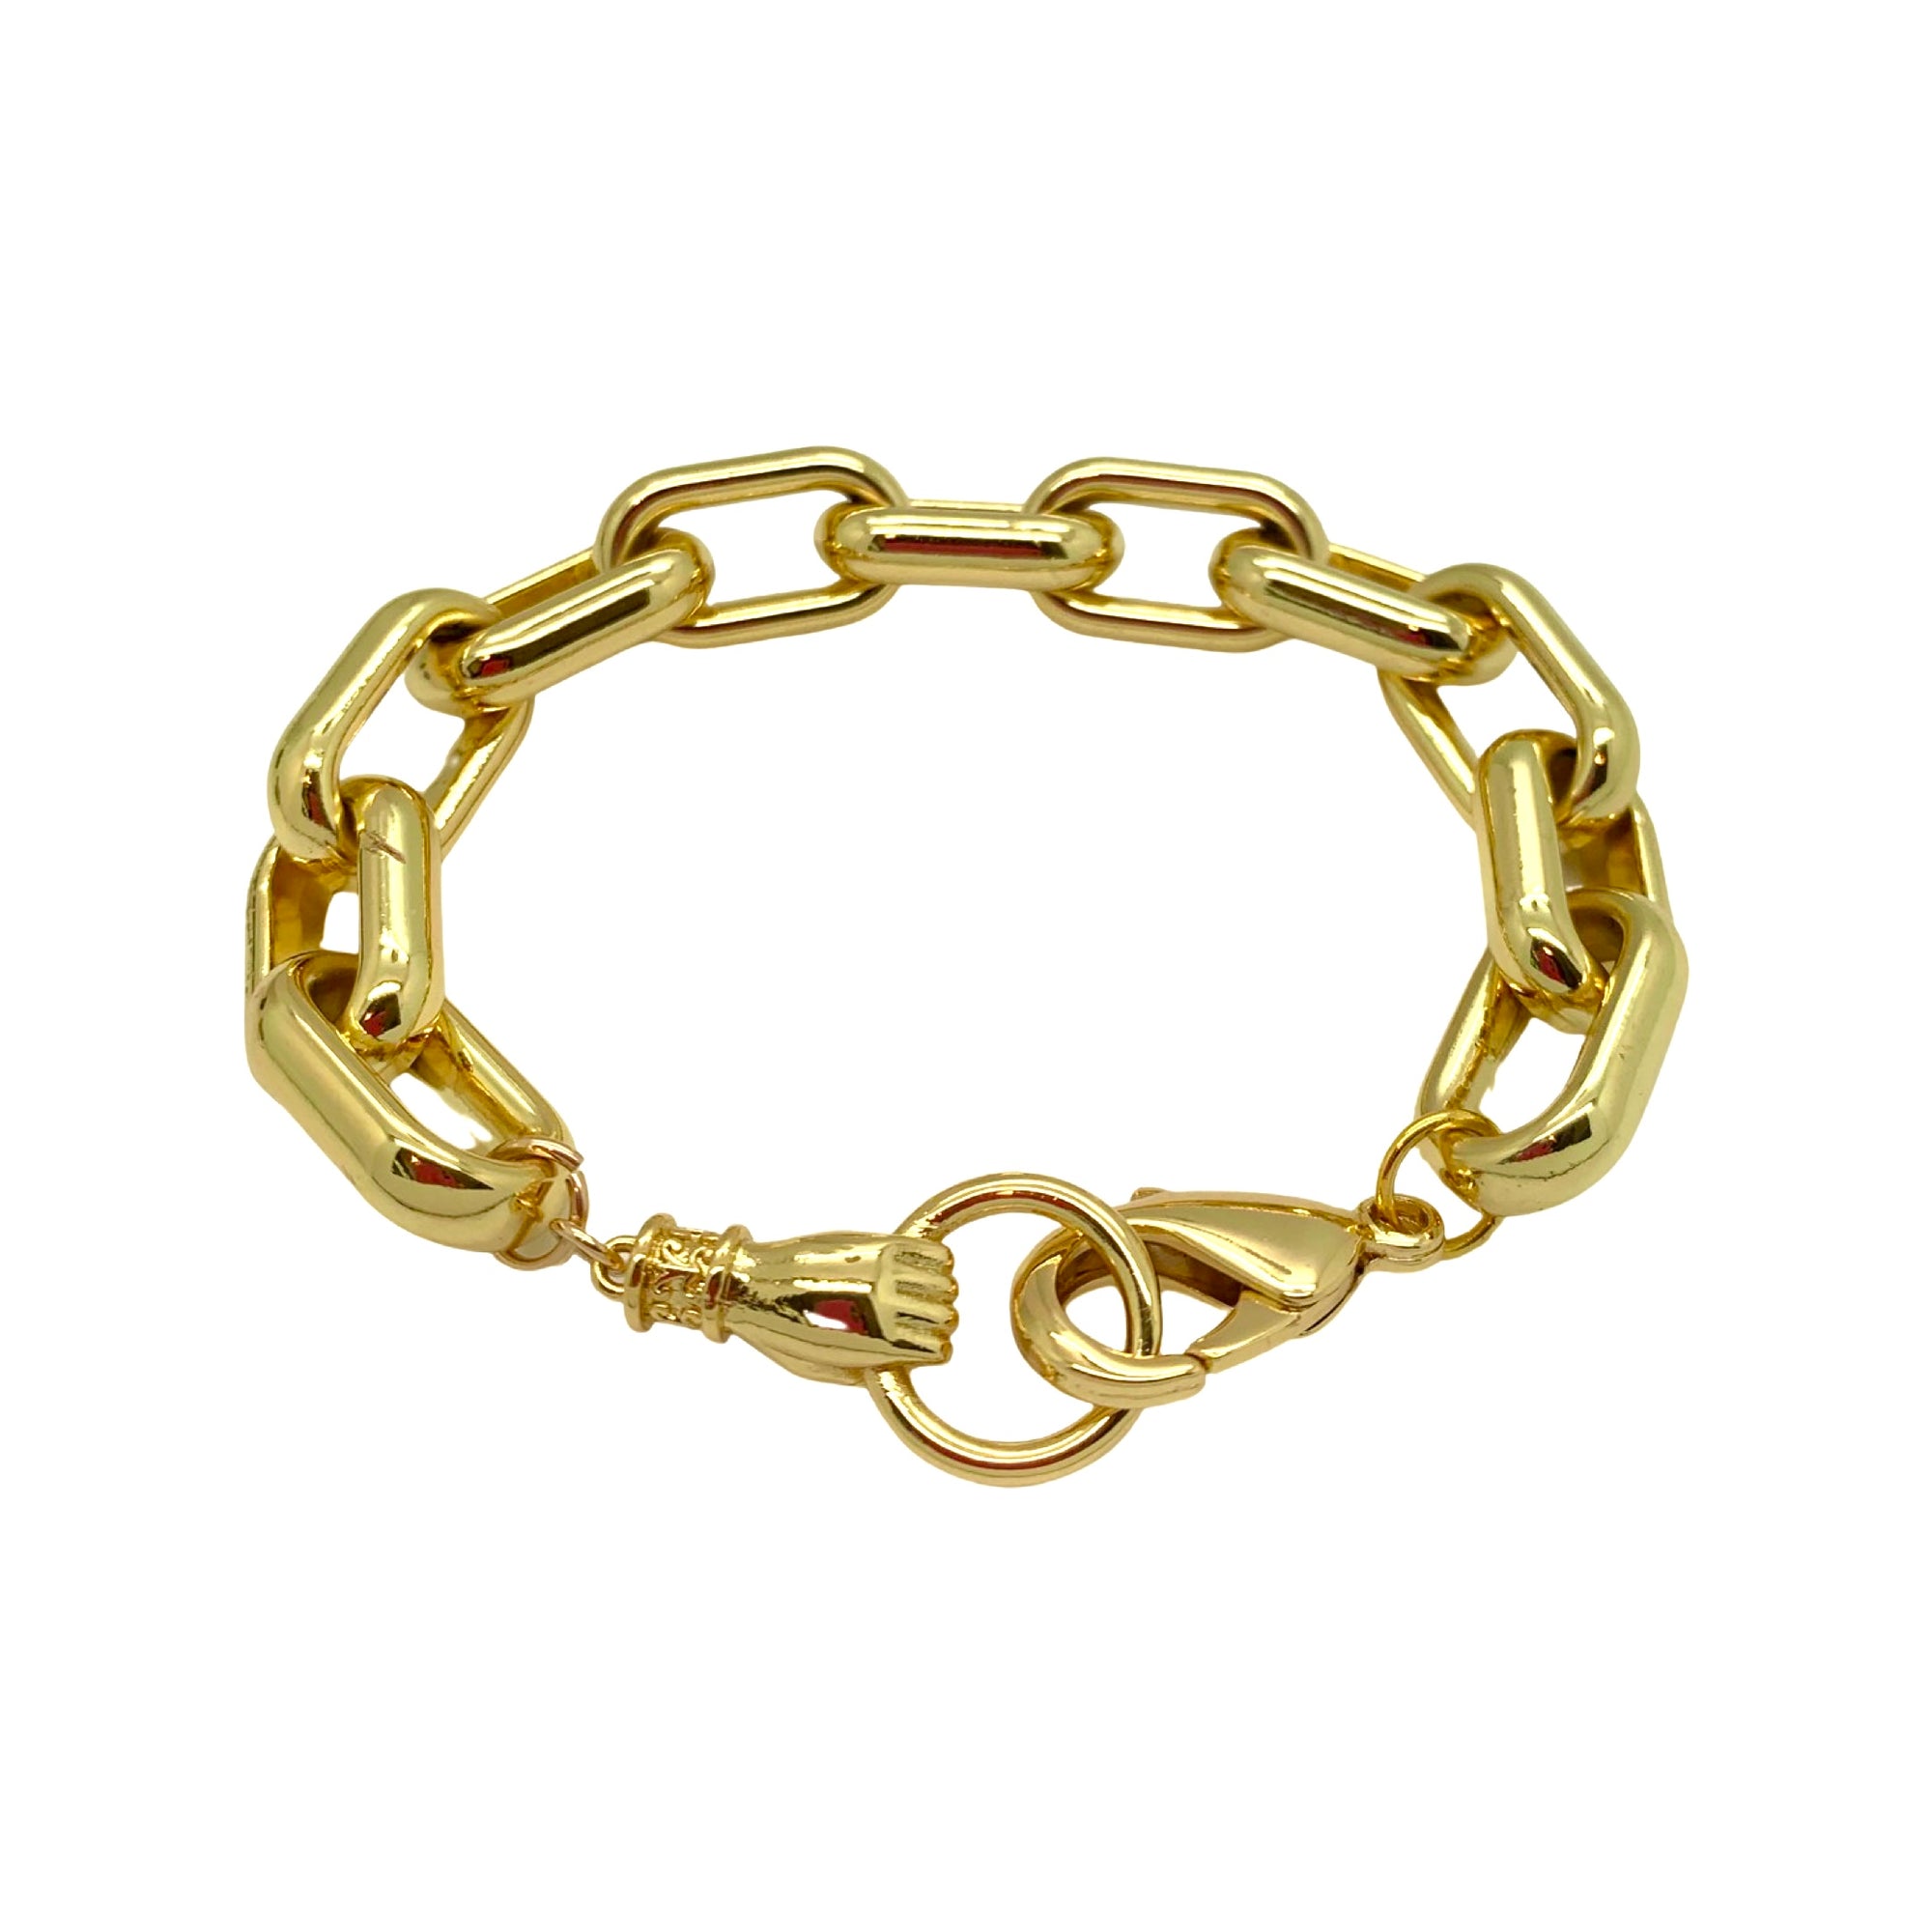 Hold my Hand Bracelet- Chunky Gold Chain Link- Paper Clip